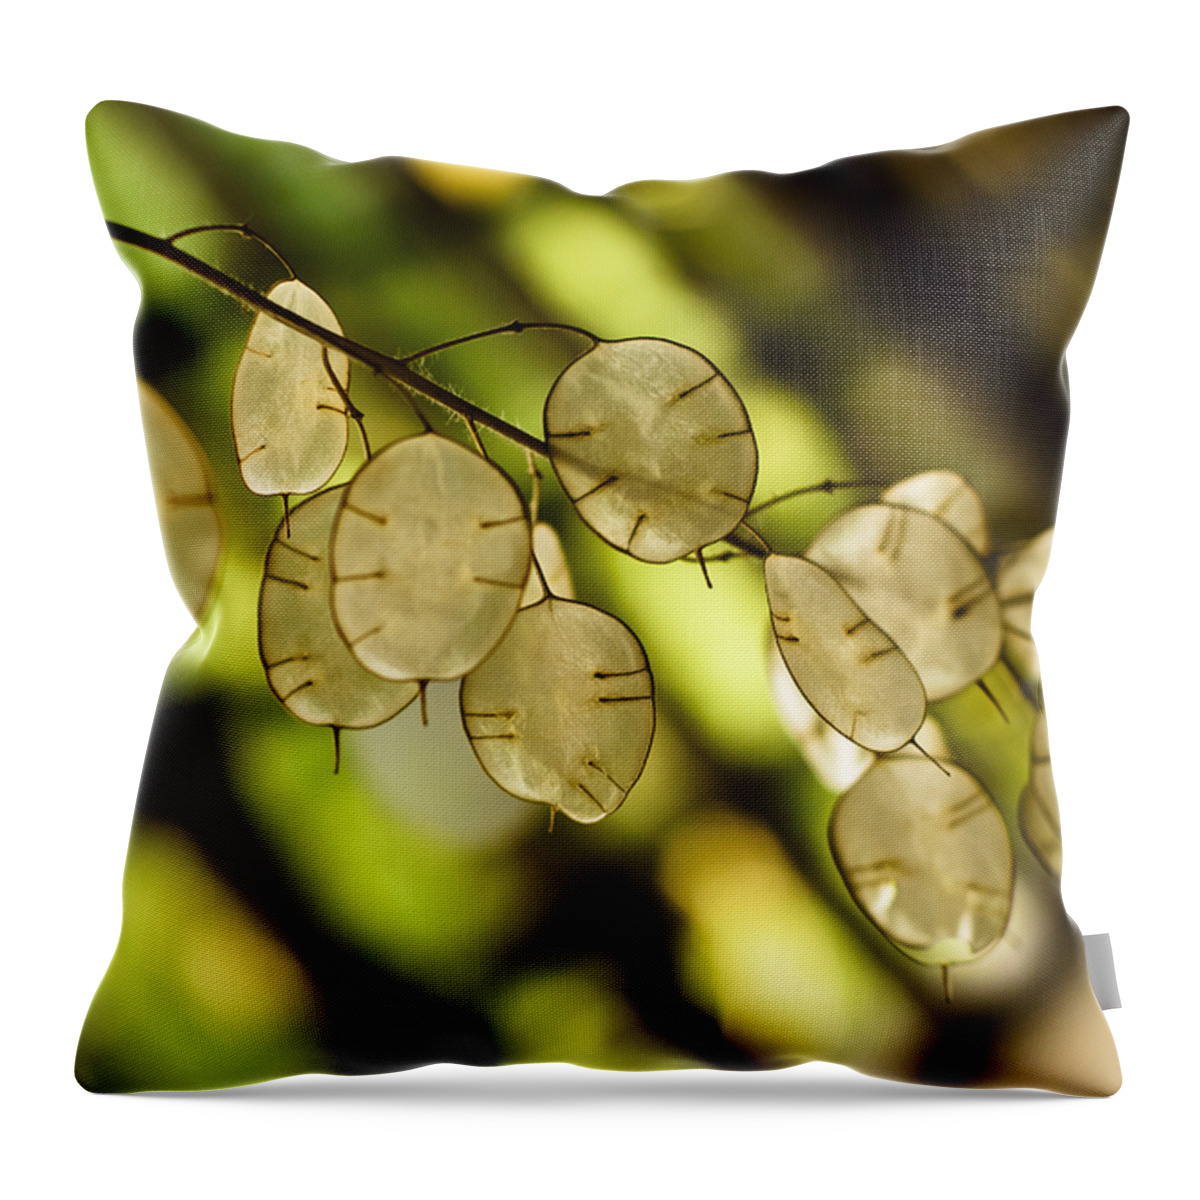 Backlit Throw Pillow featuring the photograph Money on Trees by Christi Kraft